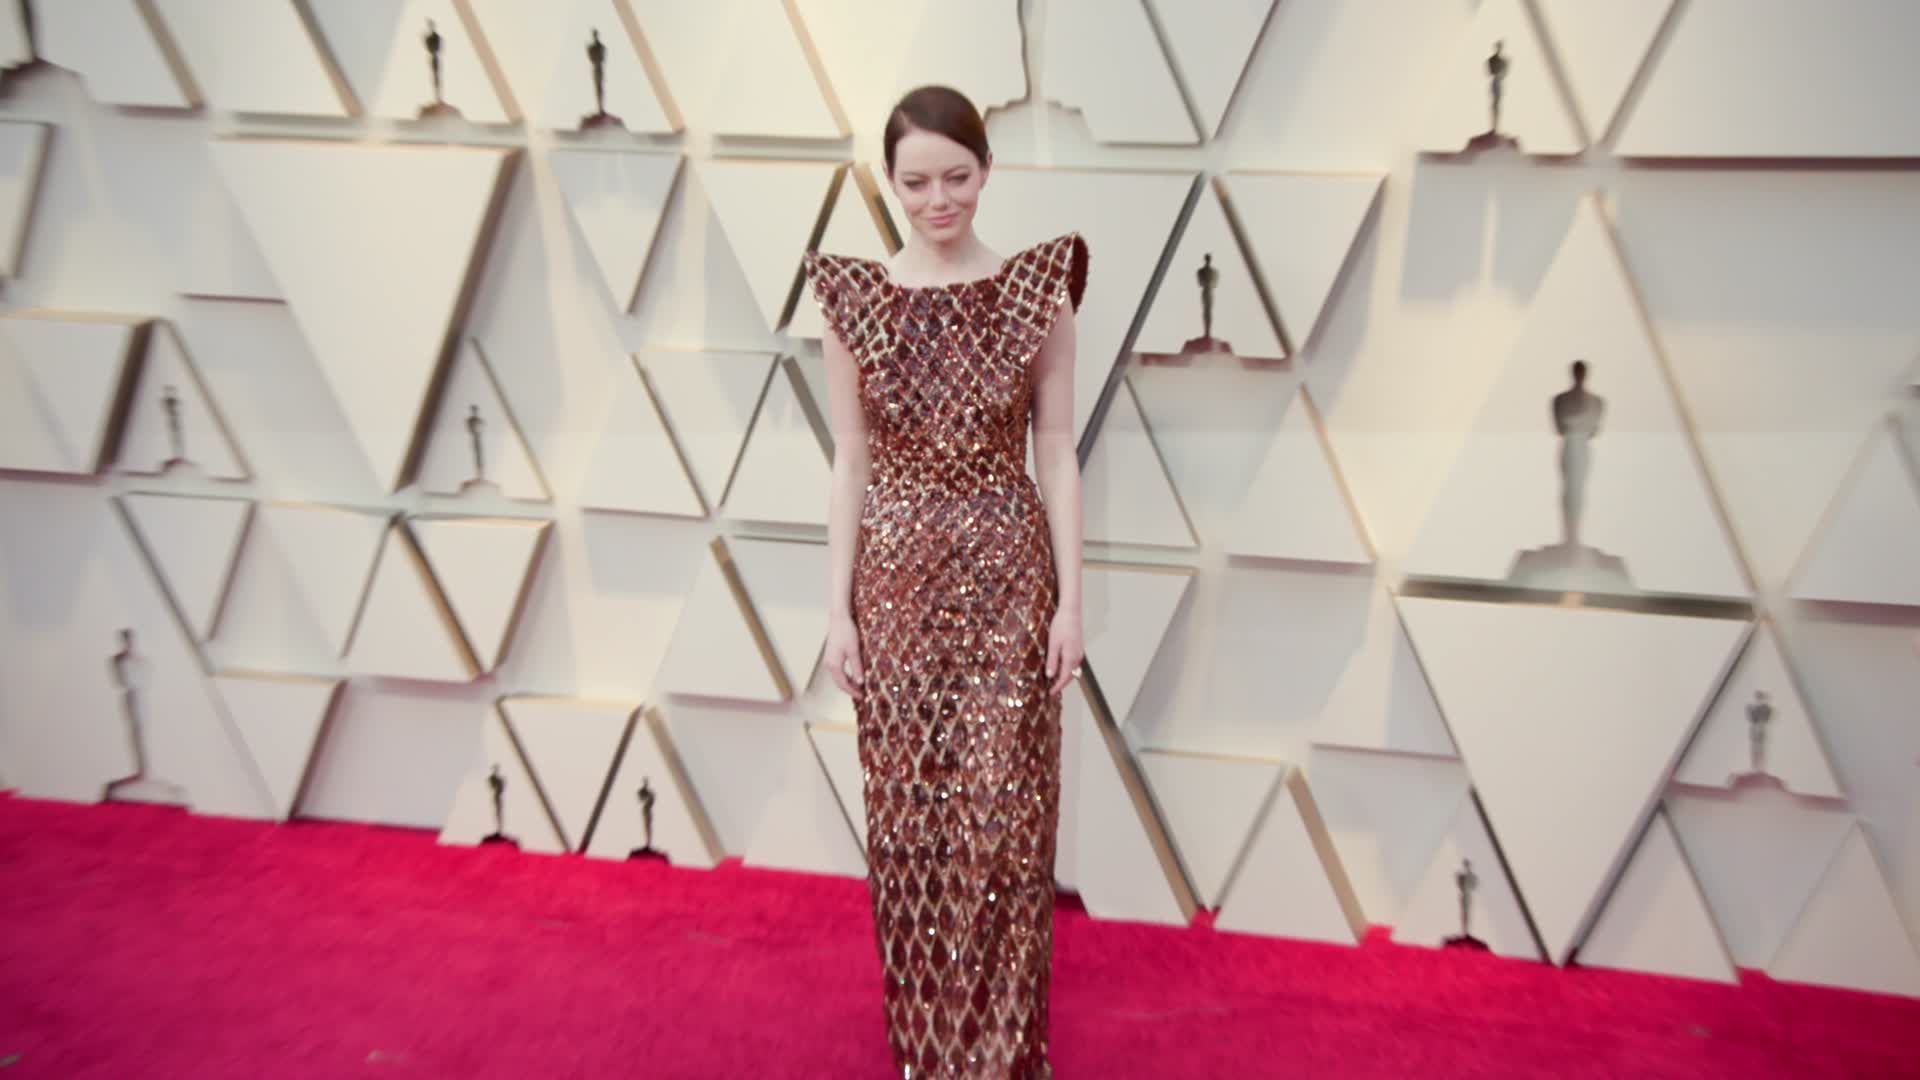 Emma Stone's Dazzling Oscars Gown Took 712 Hours to Design: Get